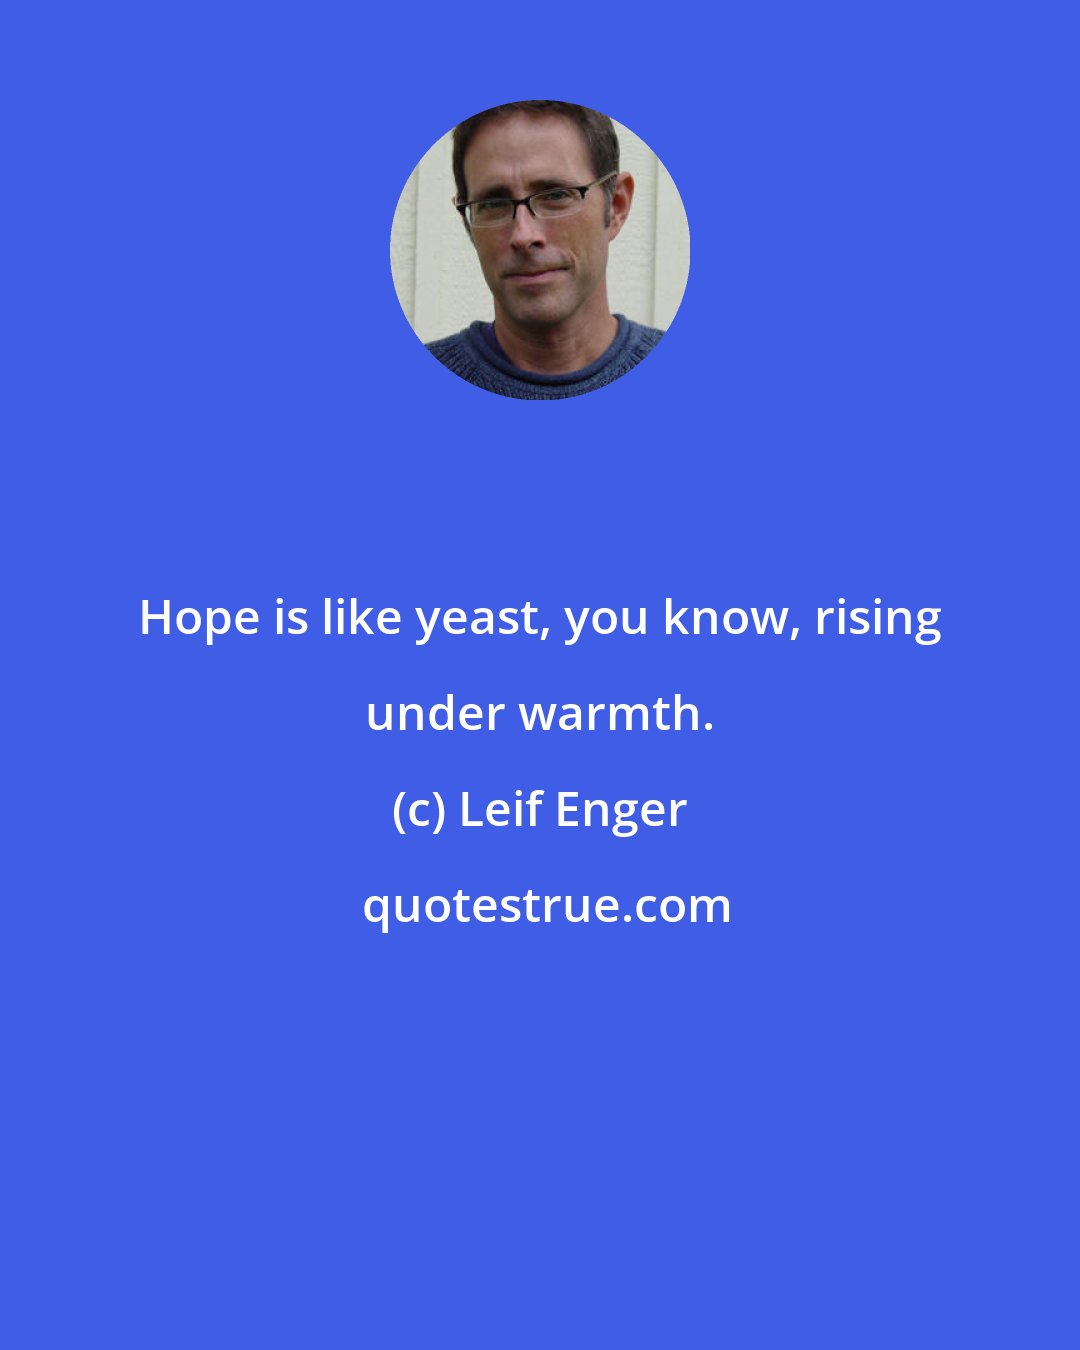 Leif Enger: Hope is like yeast, you know, rising under warmth.